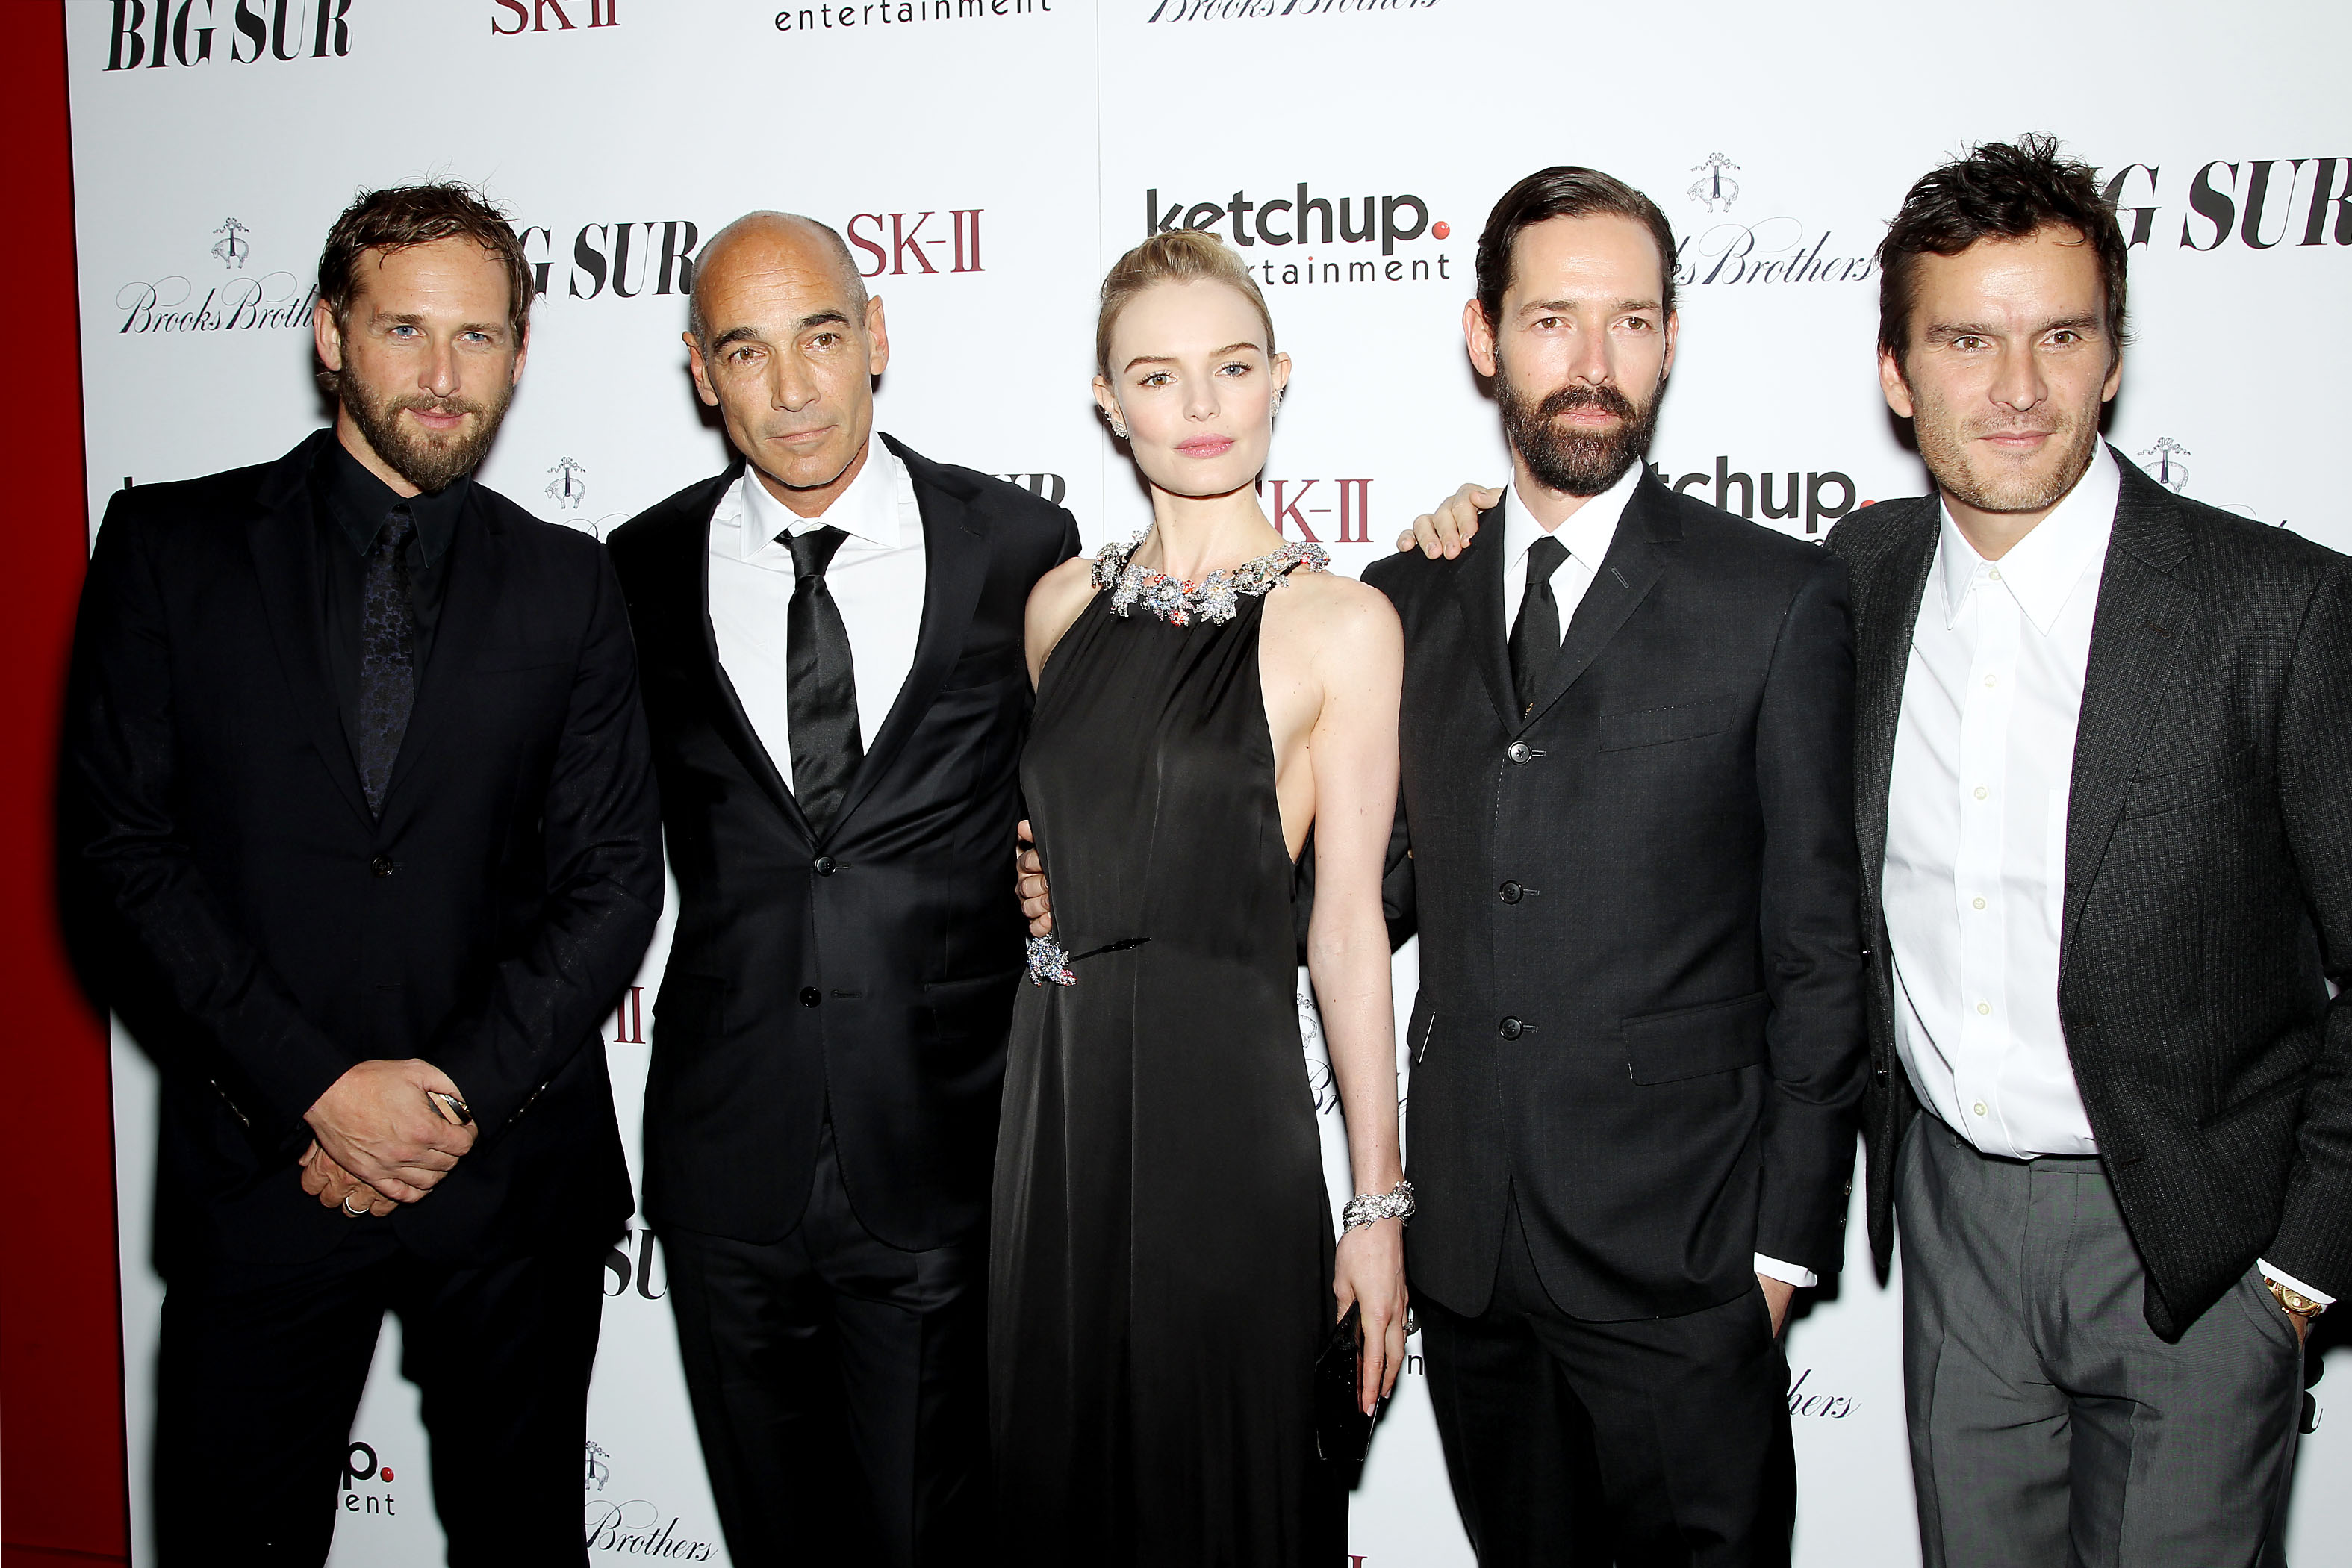 Josh Lucas, Jean Marc-Barr, Kate Bosworth, Michael Polish (Director), Balthazar Getty - Brooks Brothers and SK-II present the New York Premiere of Ketchup Entertainment's "BIG SUR"